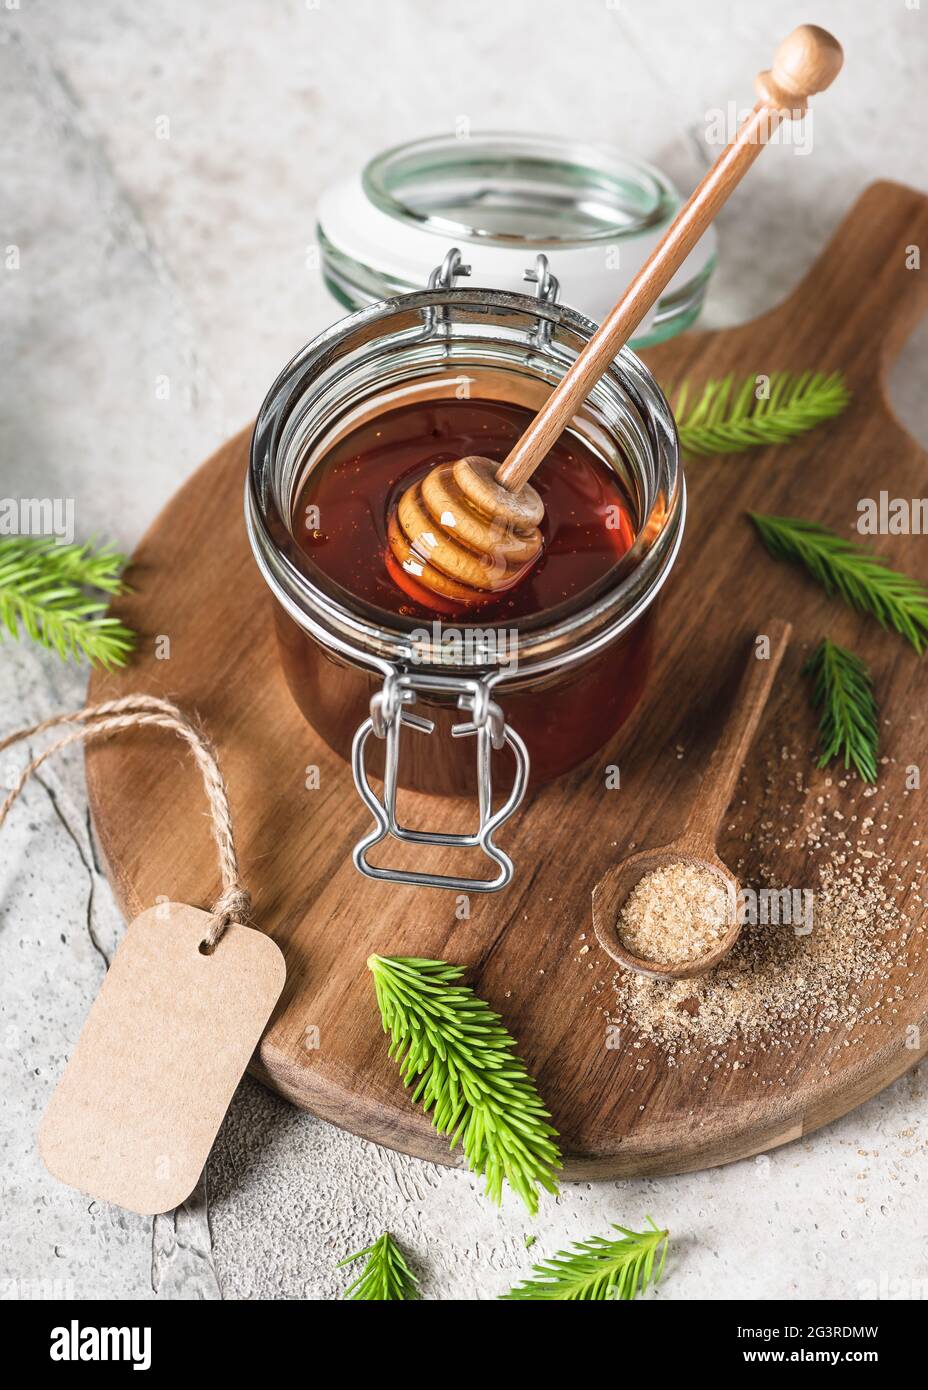 Jar of homemade jam from young fir buds, needles and nature sugar with wooden honey spoon. Making spruce tips jam at home. Stock Photo